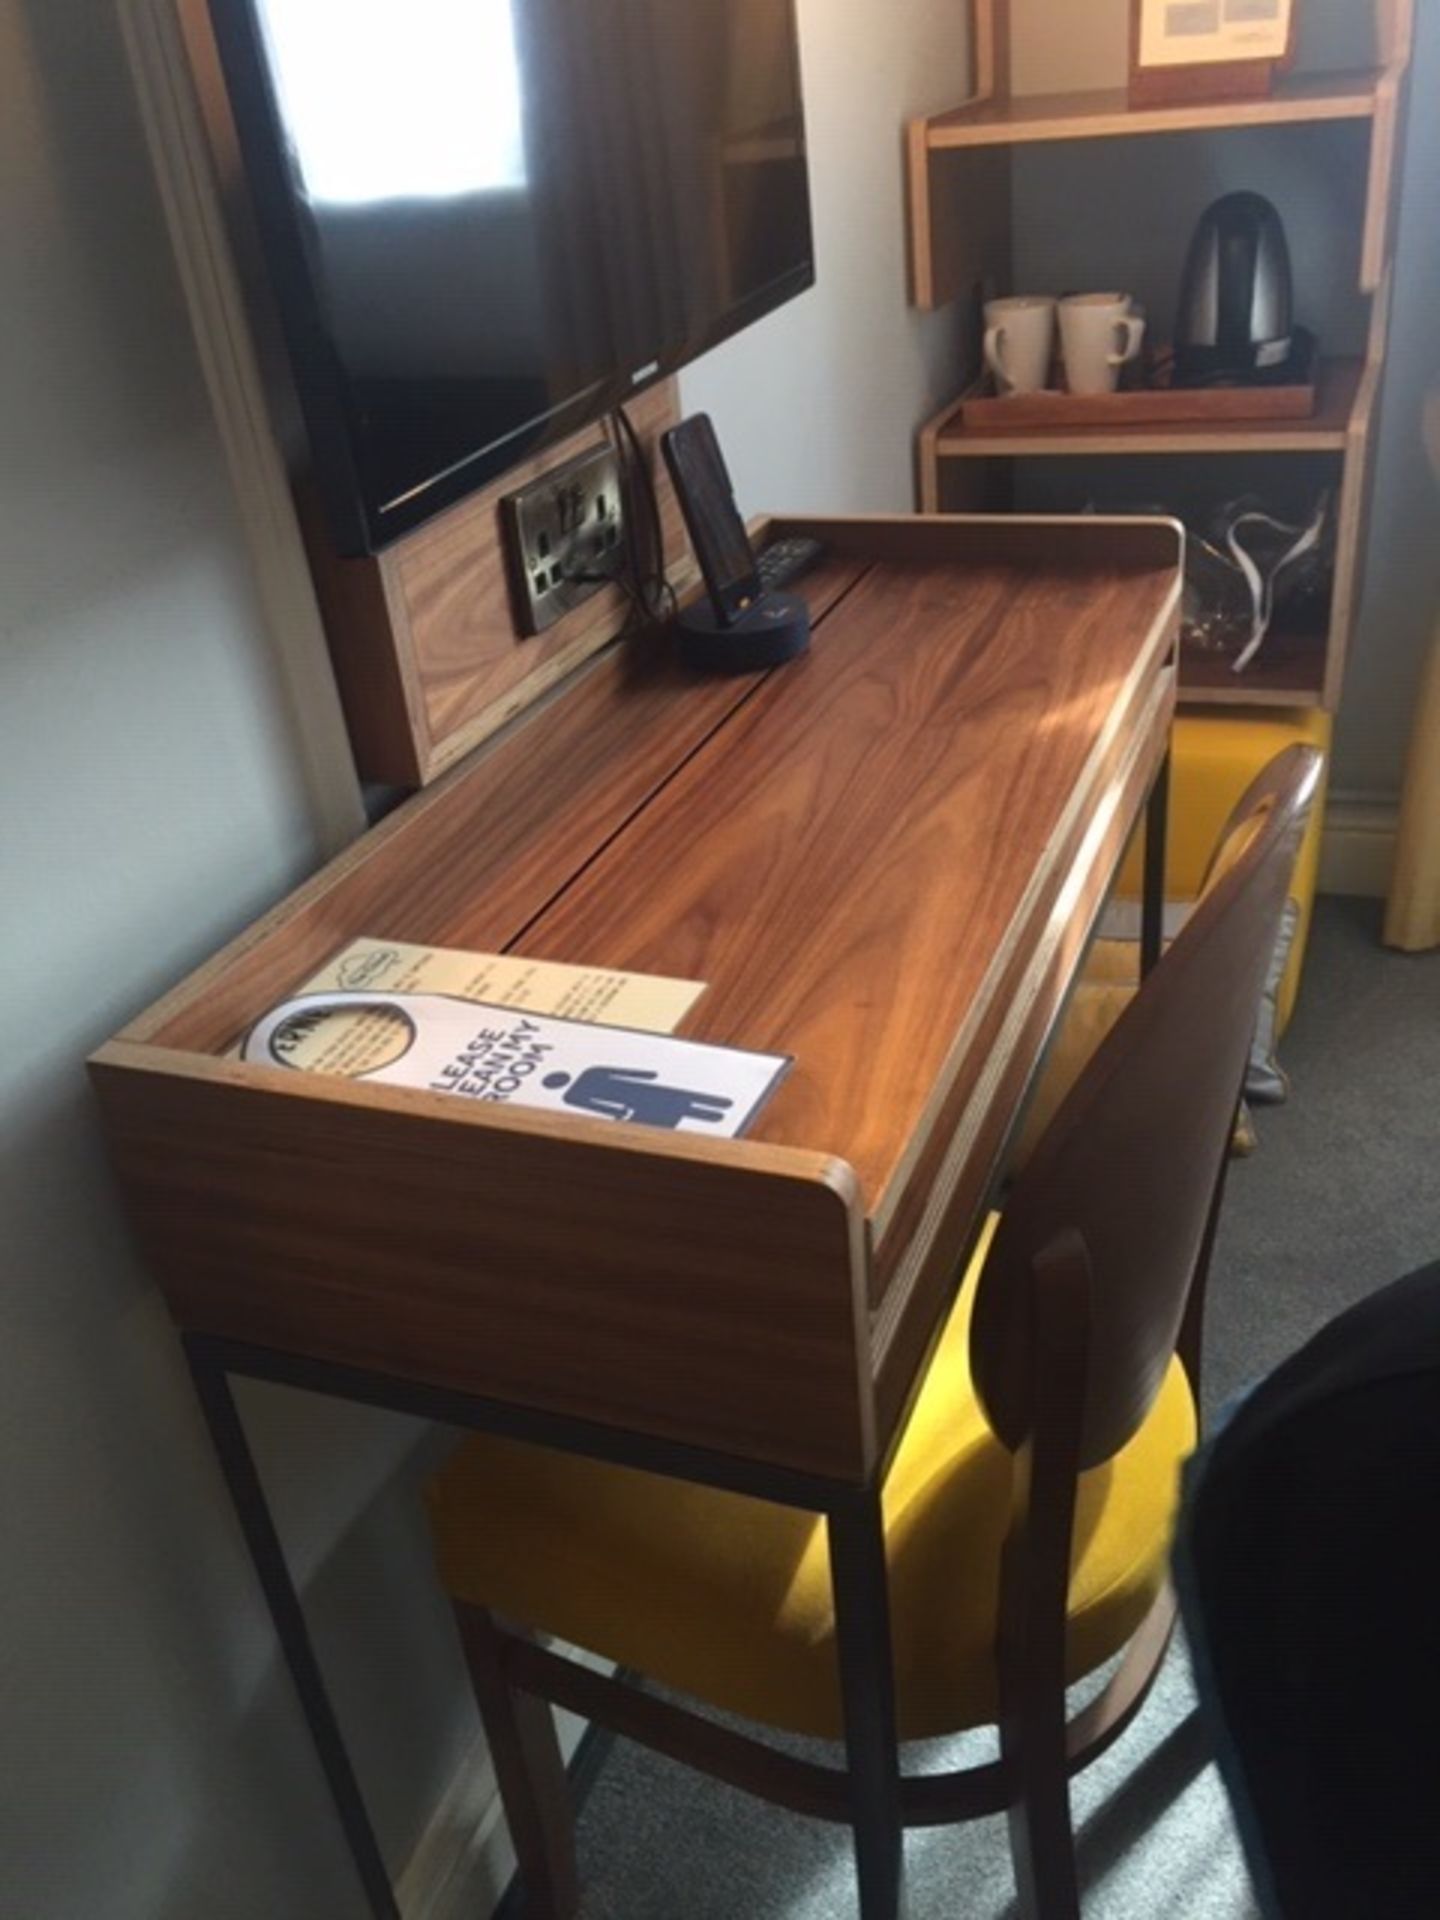 Slim line wood desk with lid for internal storage - matching other items listed. Commercial quality. - Image 3 of 3